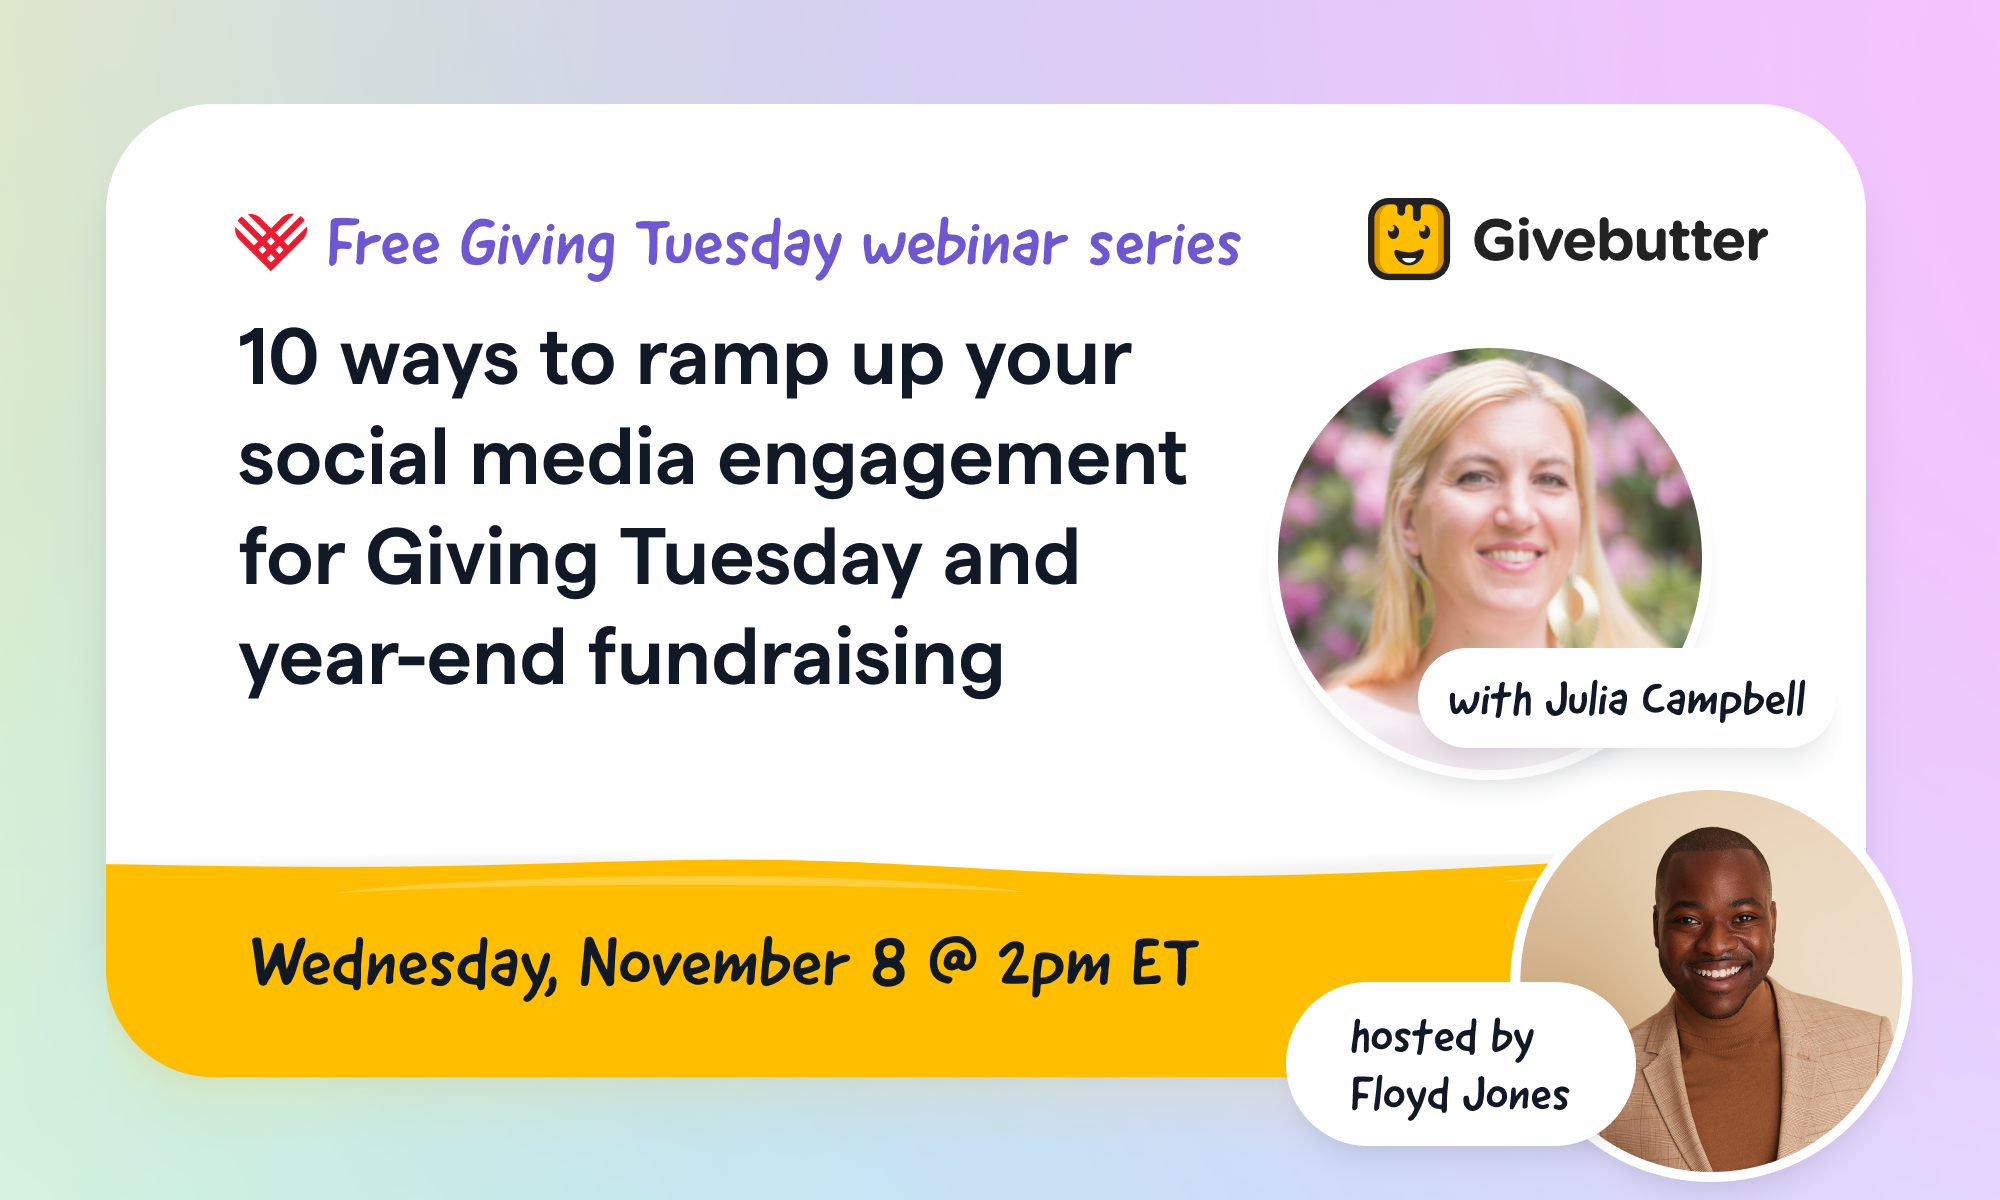 10 ways to ramp up your social media engagement for Giving Tuesday and year-end fundraising